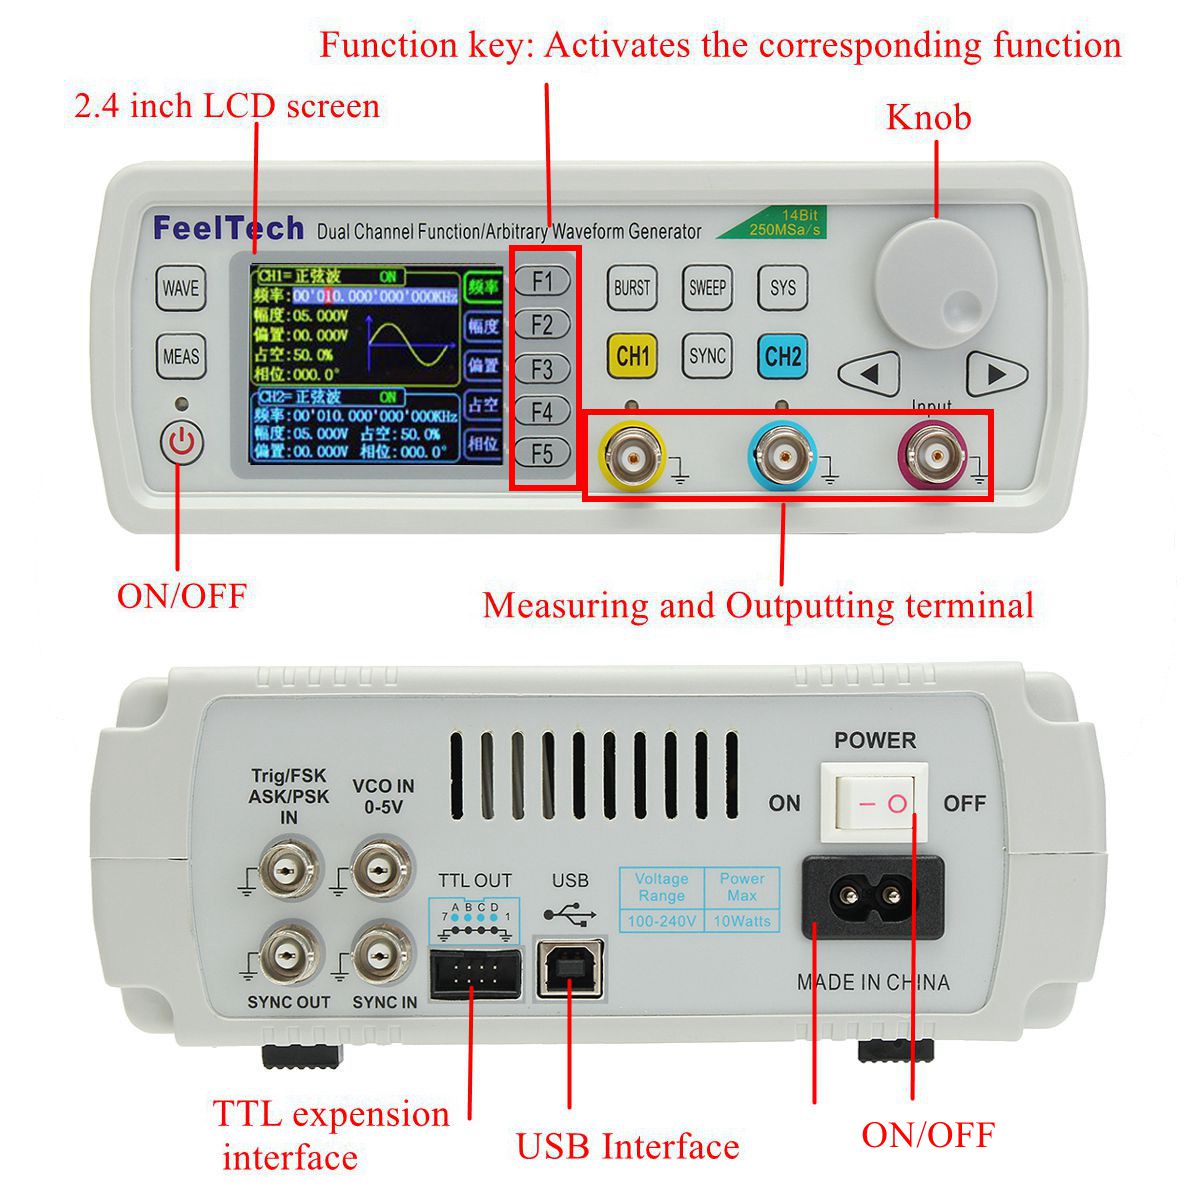 FY6600 Digital 12-60MHz Dual Channel DDS Function Arbitrary Waveform Signal Generator Frequency Meter 11